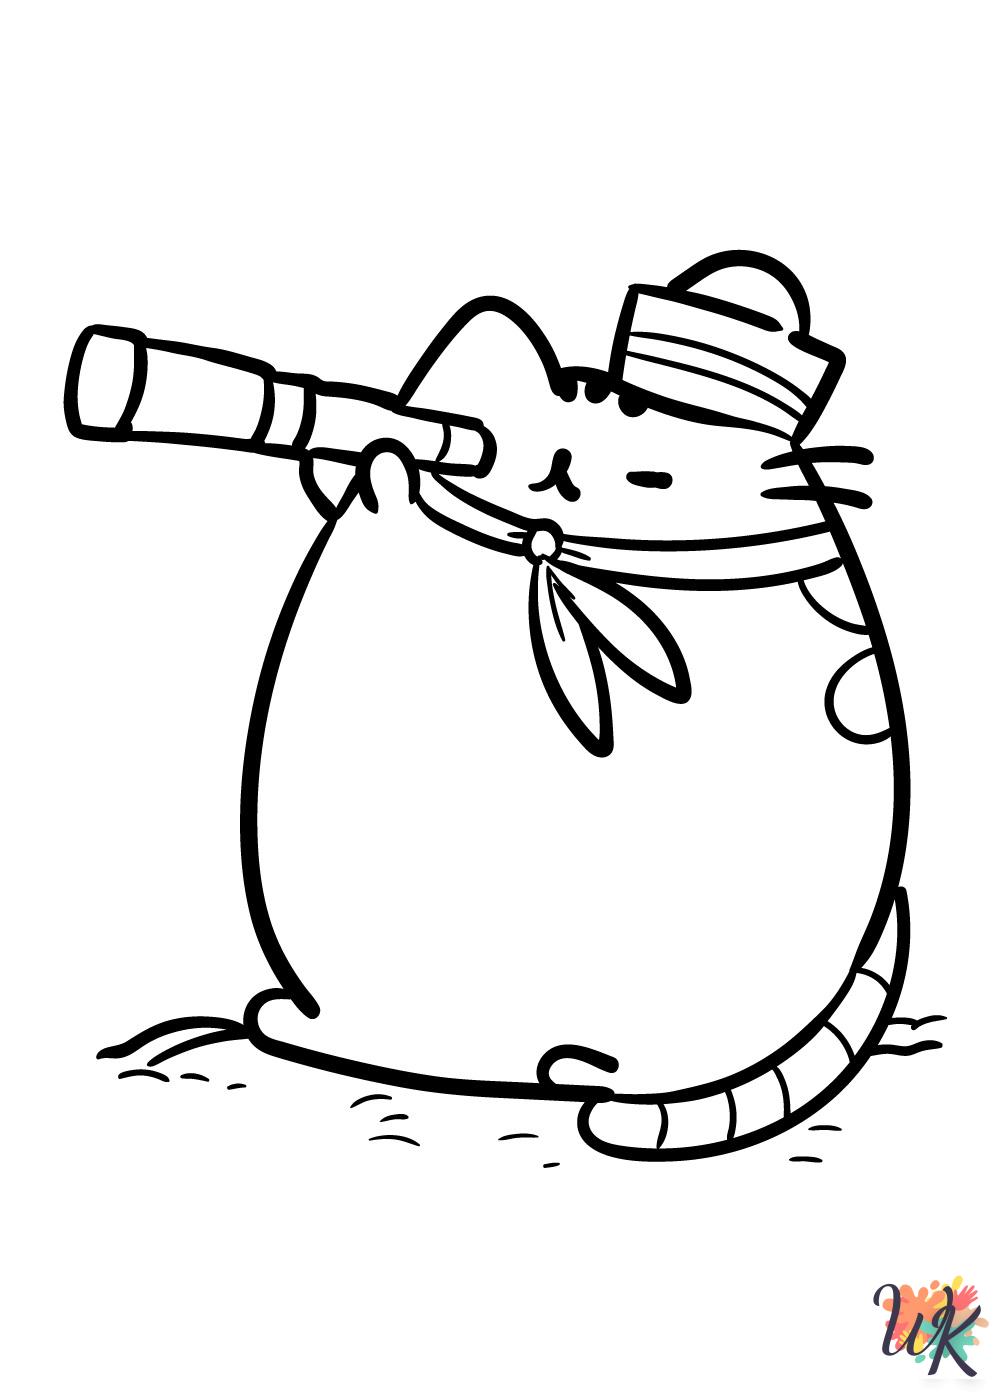 Pusheen coloring pages printable